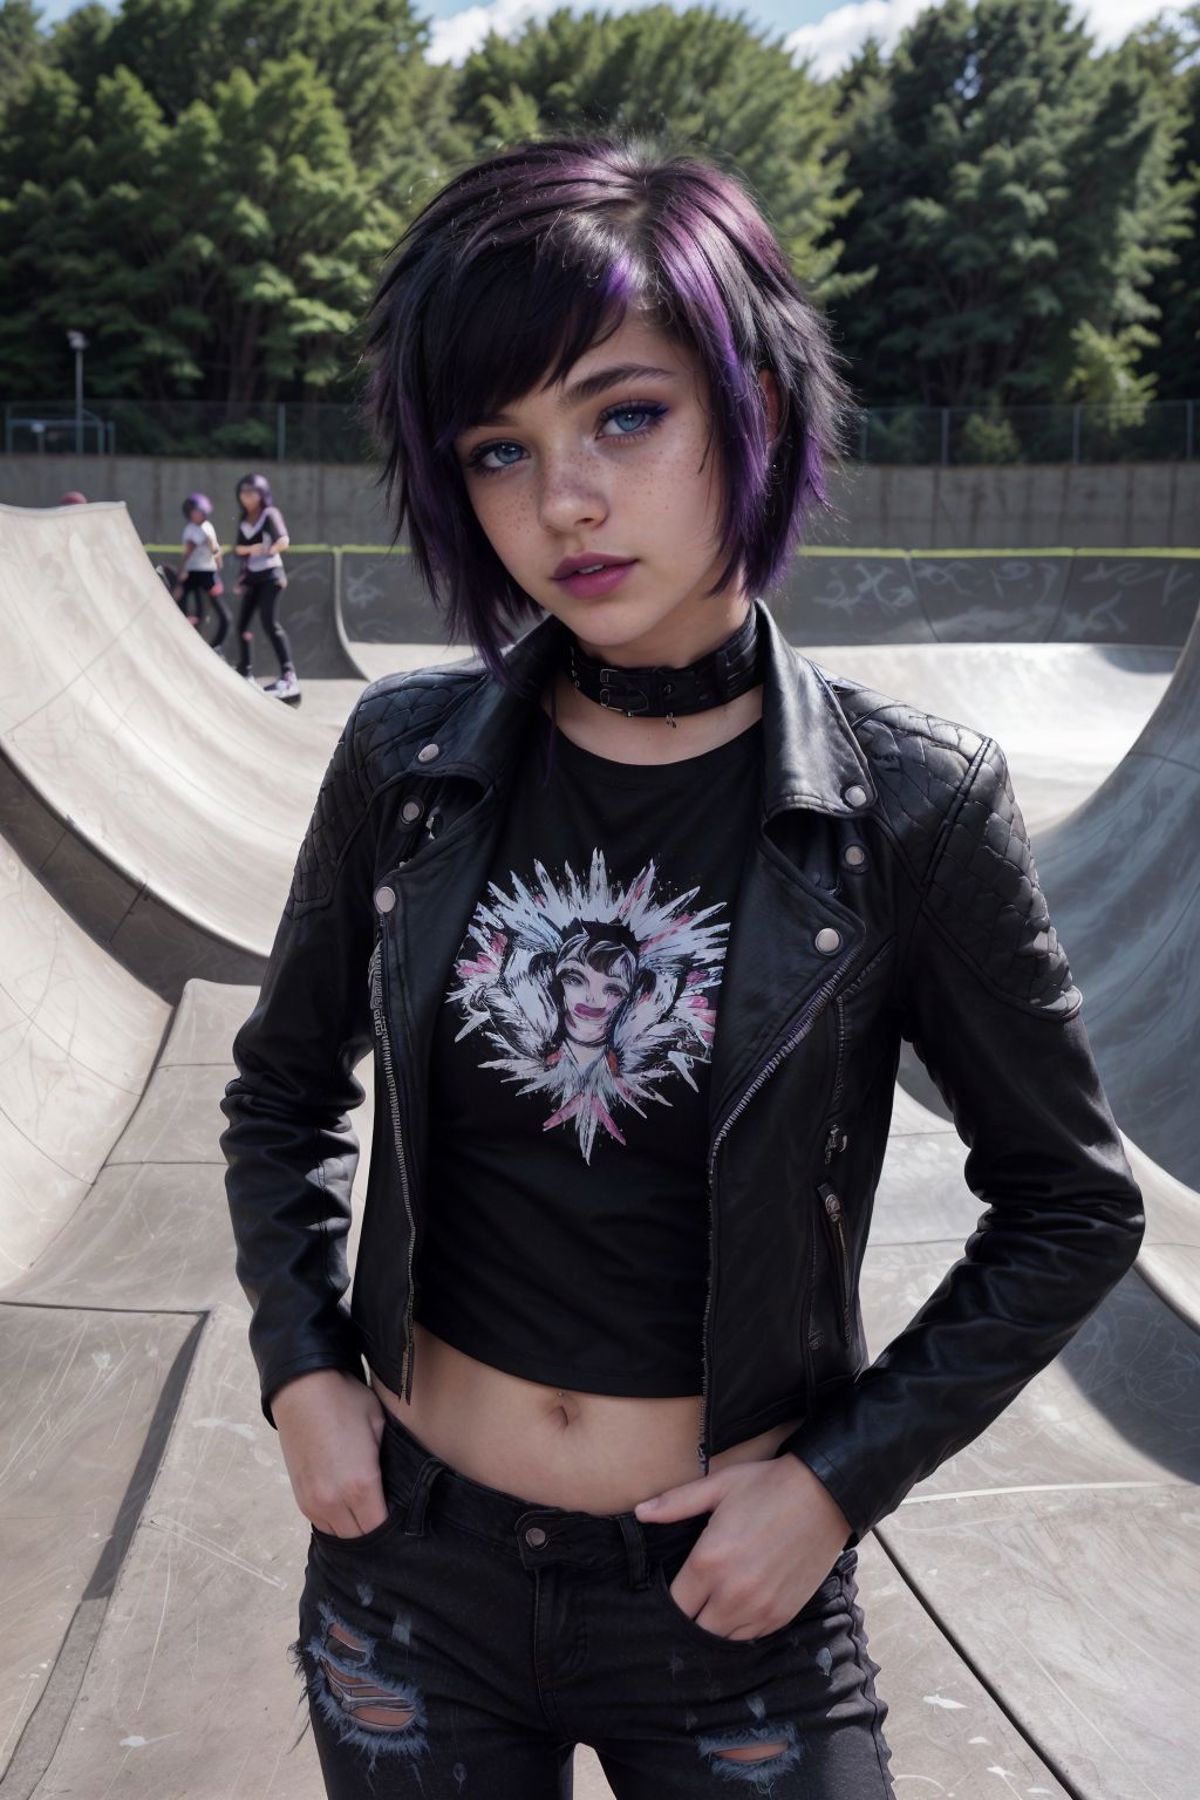 A woman wearing a black leather jacket, black lipstick, and purple hair posing at a skate park.